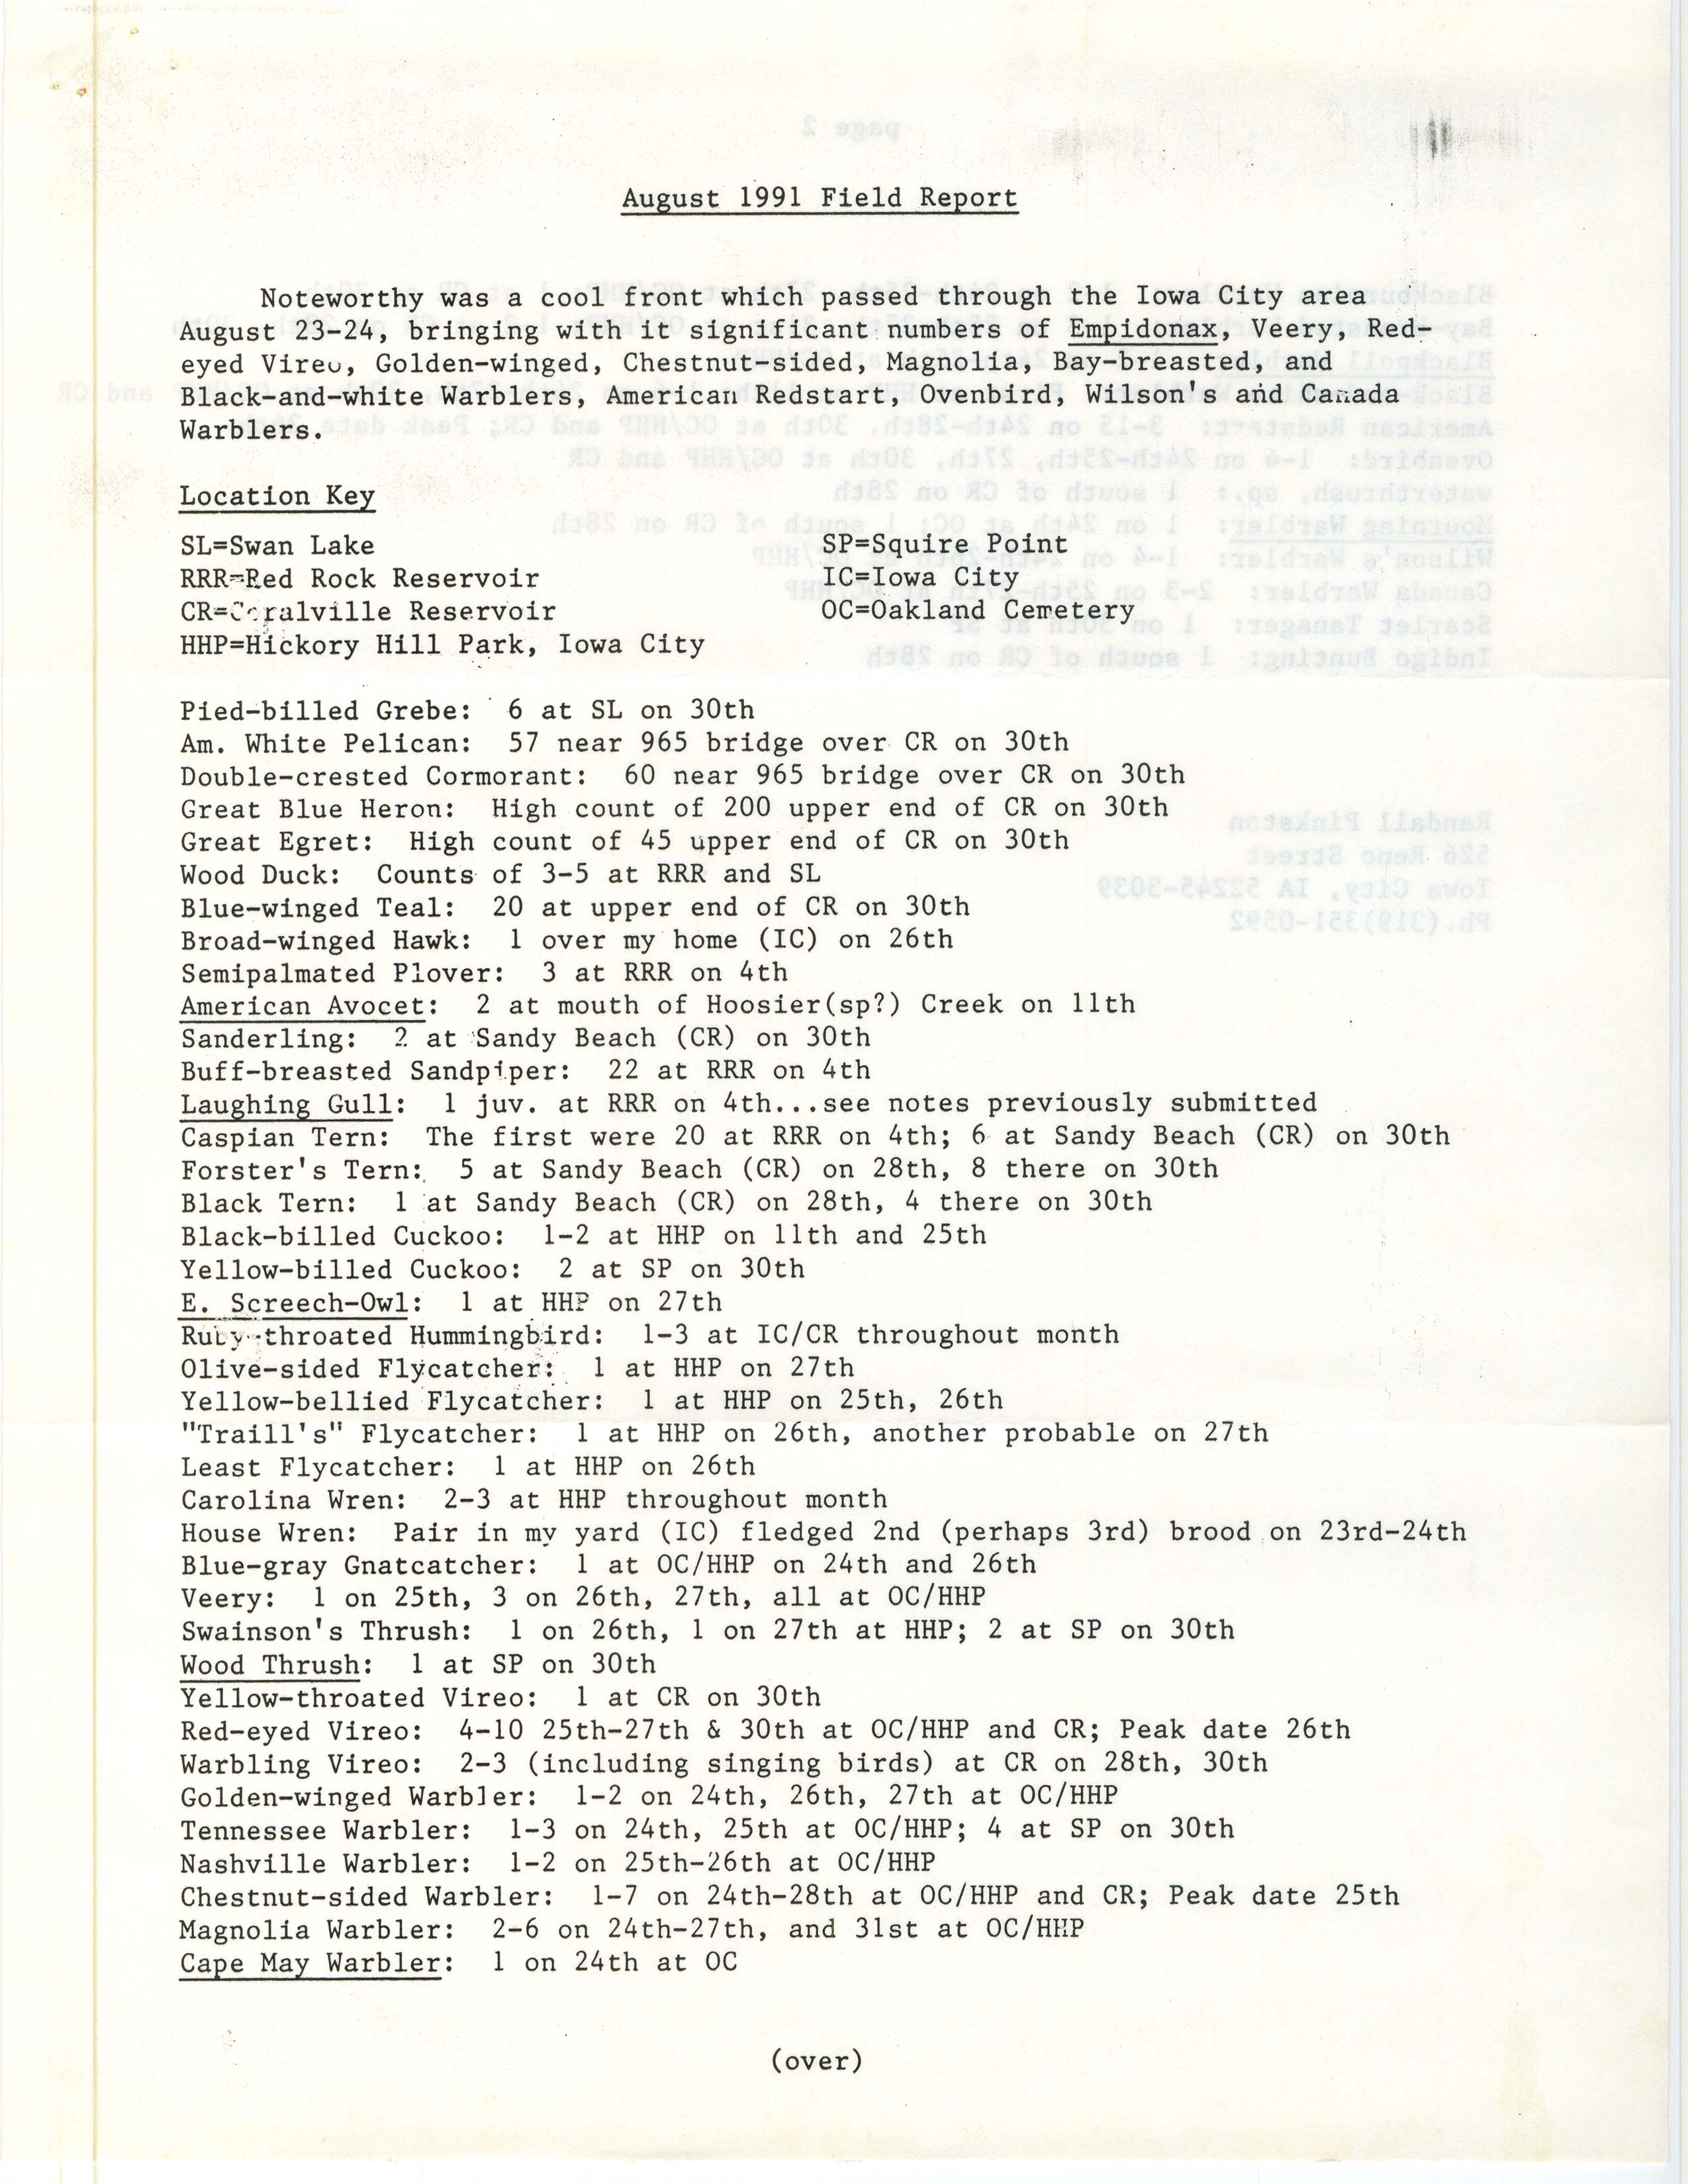 Field notes contributed by Randall Pinkston, fall 1991